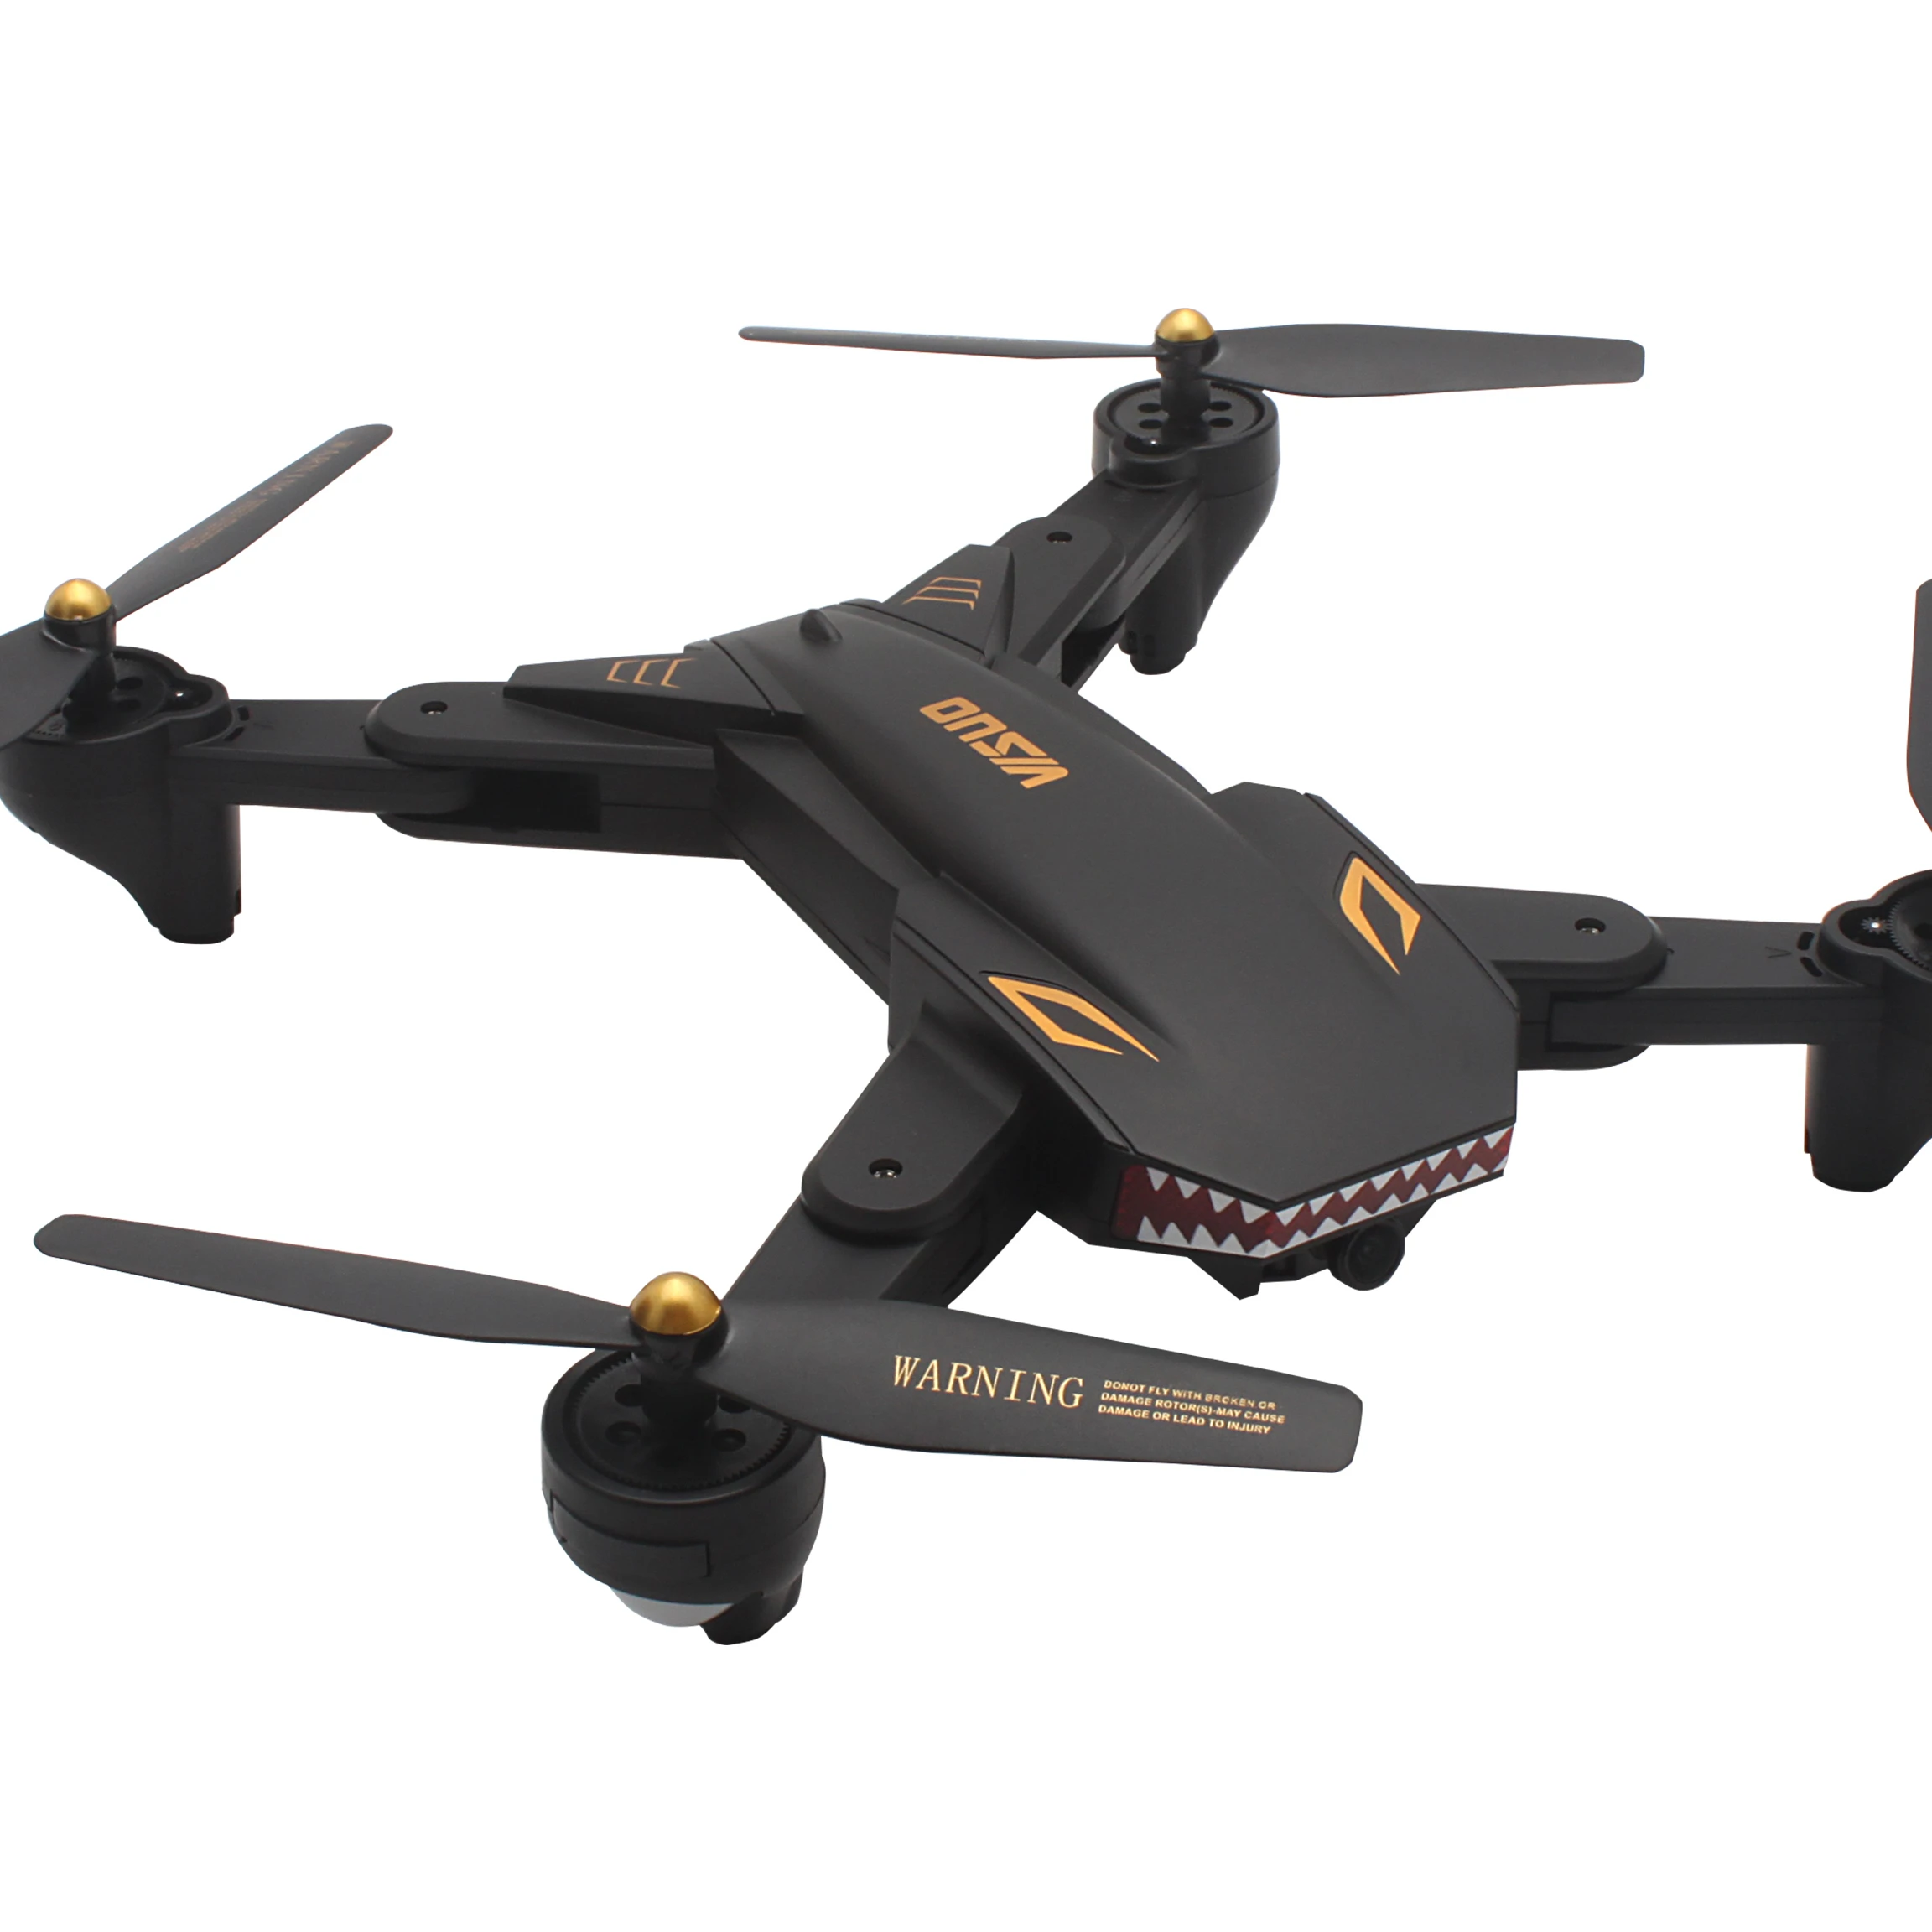 

Free Shipping VISUO XS809S BATTLES SHARKS Drone with Wide Angle 2MP HD Camera WiFi FPV 20min Flight Time Foldable RC Quadcopter, Black